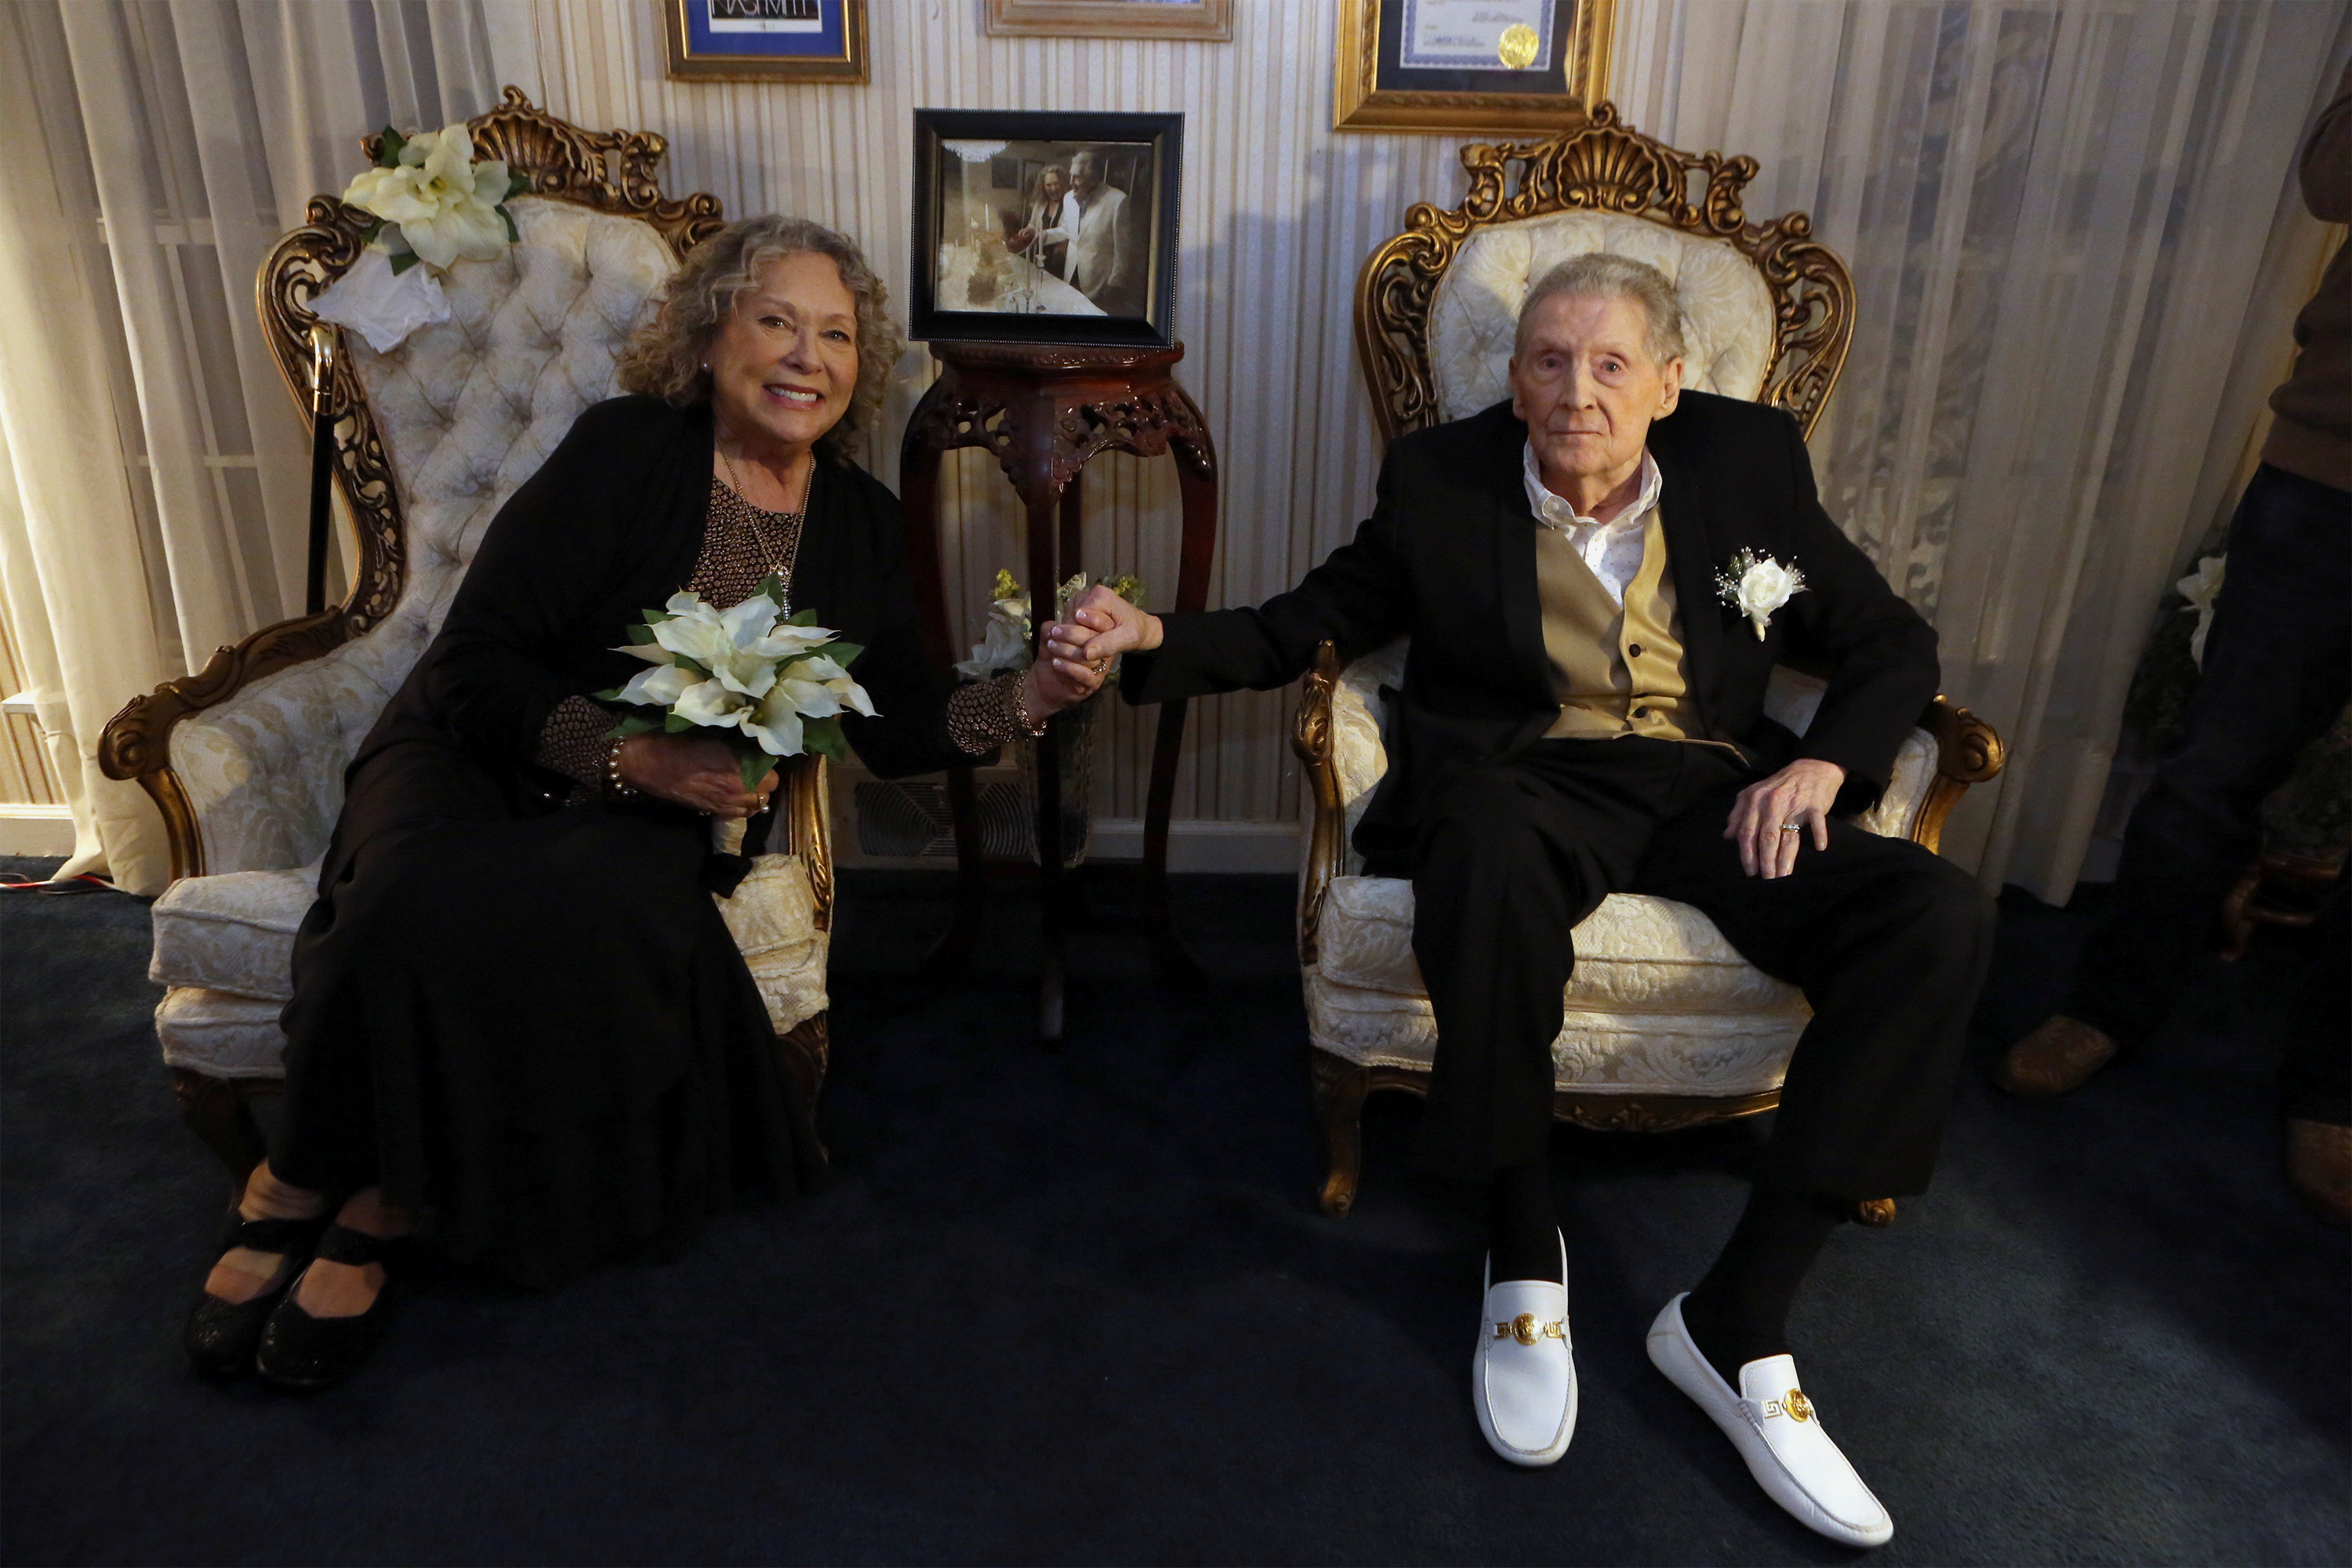 A vaccinated 85-year-old Jerry Lee Lewis, the last living member of the Million Dollar Quartet that recorded many hits at Memphis' Sun Records in the 1950s, renews marriage vows with 7th wife Judith at his ranch in Nesbit, Mississippi, U.S. March 9, 2021.  REUTERS/Karen Pulfer Focht